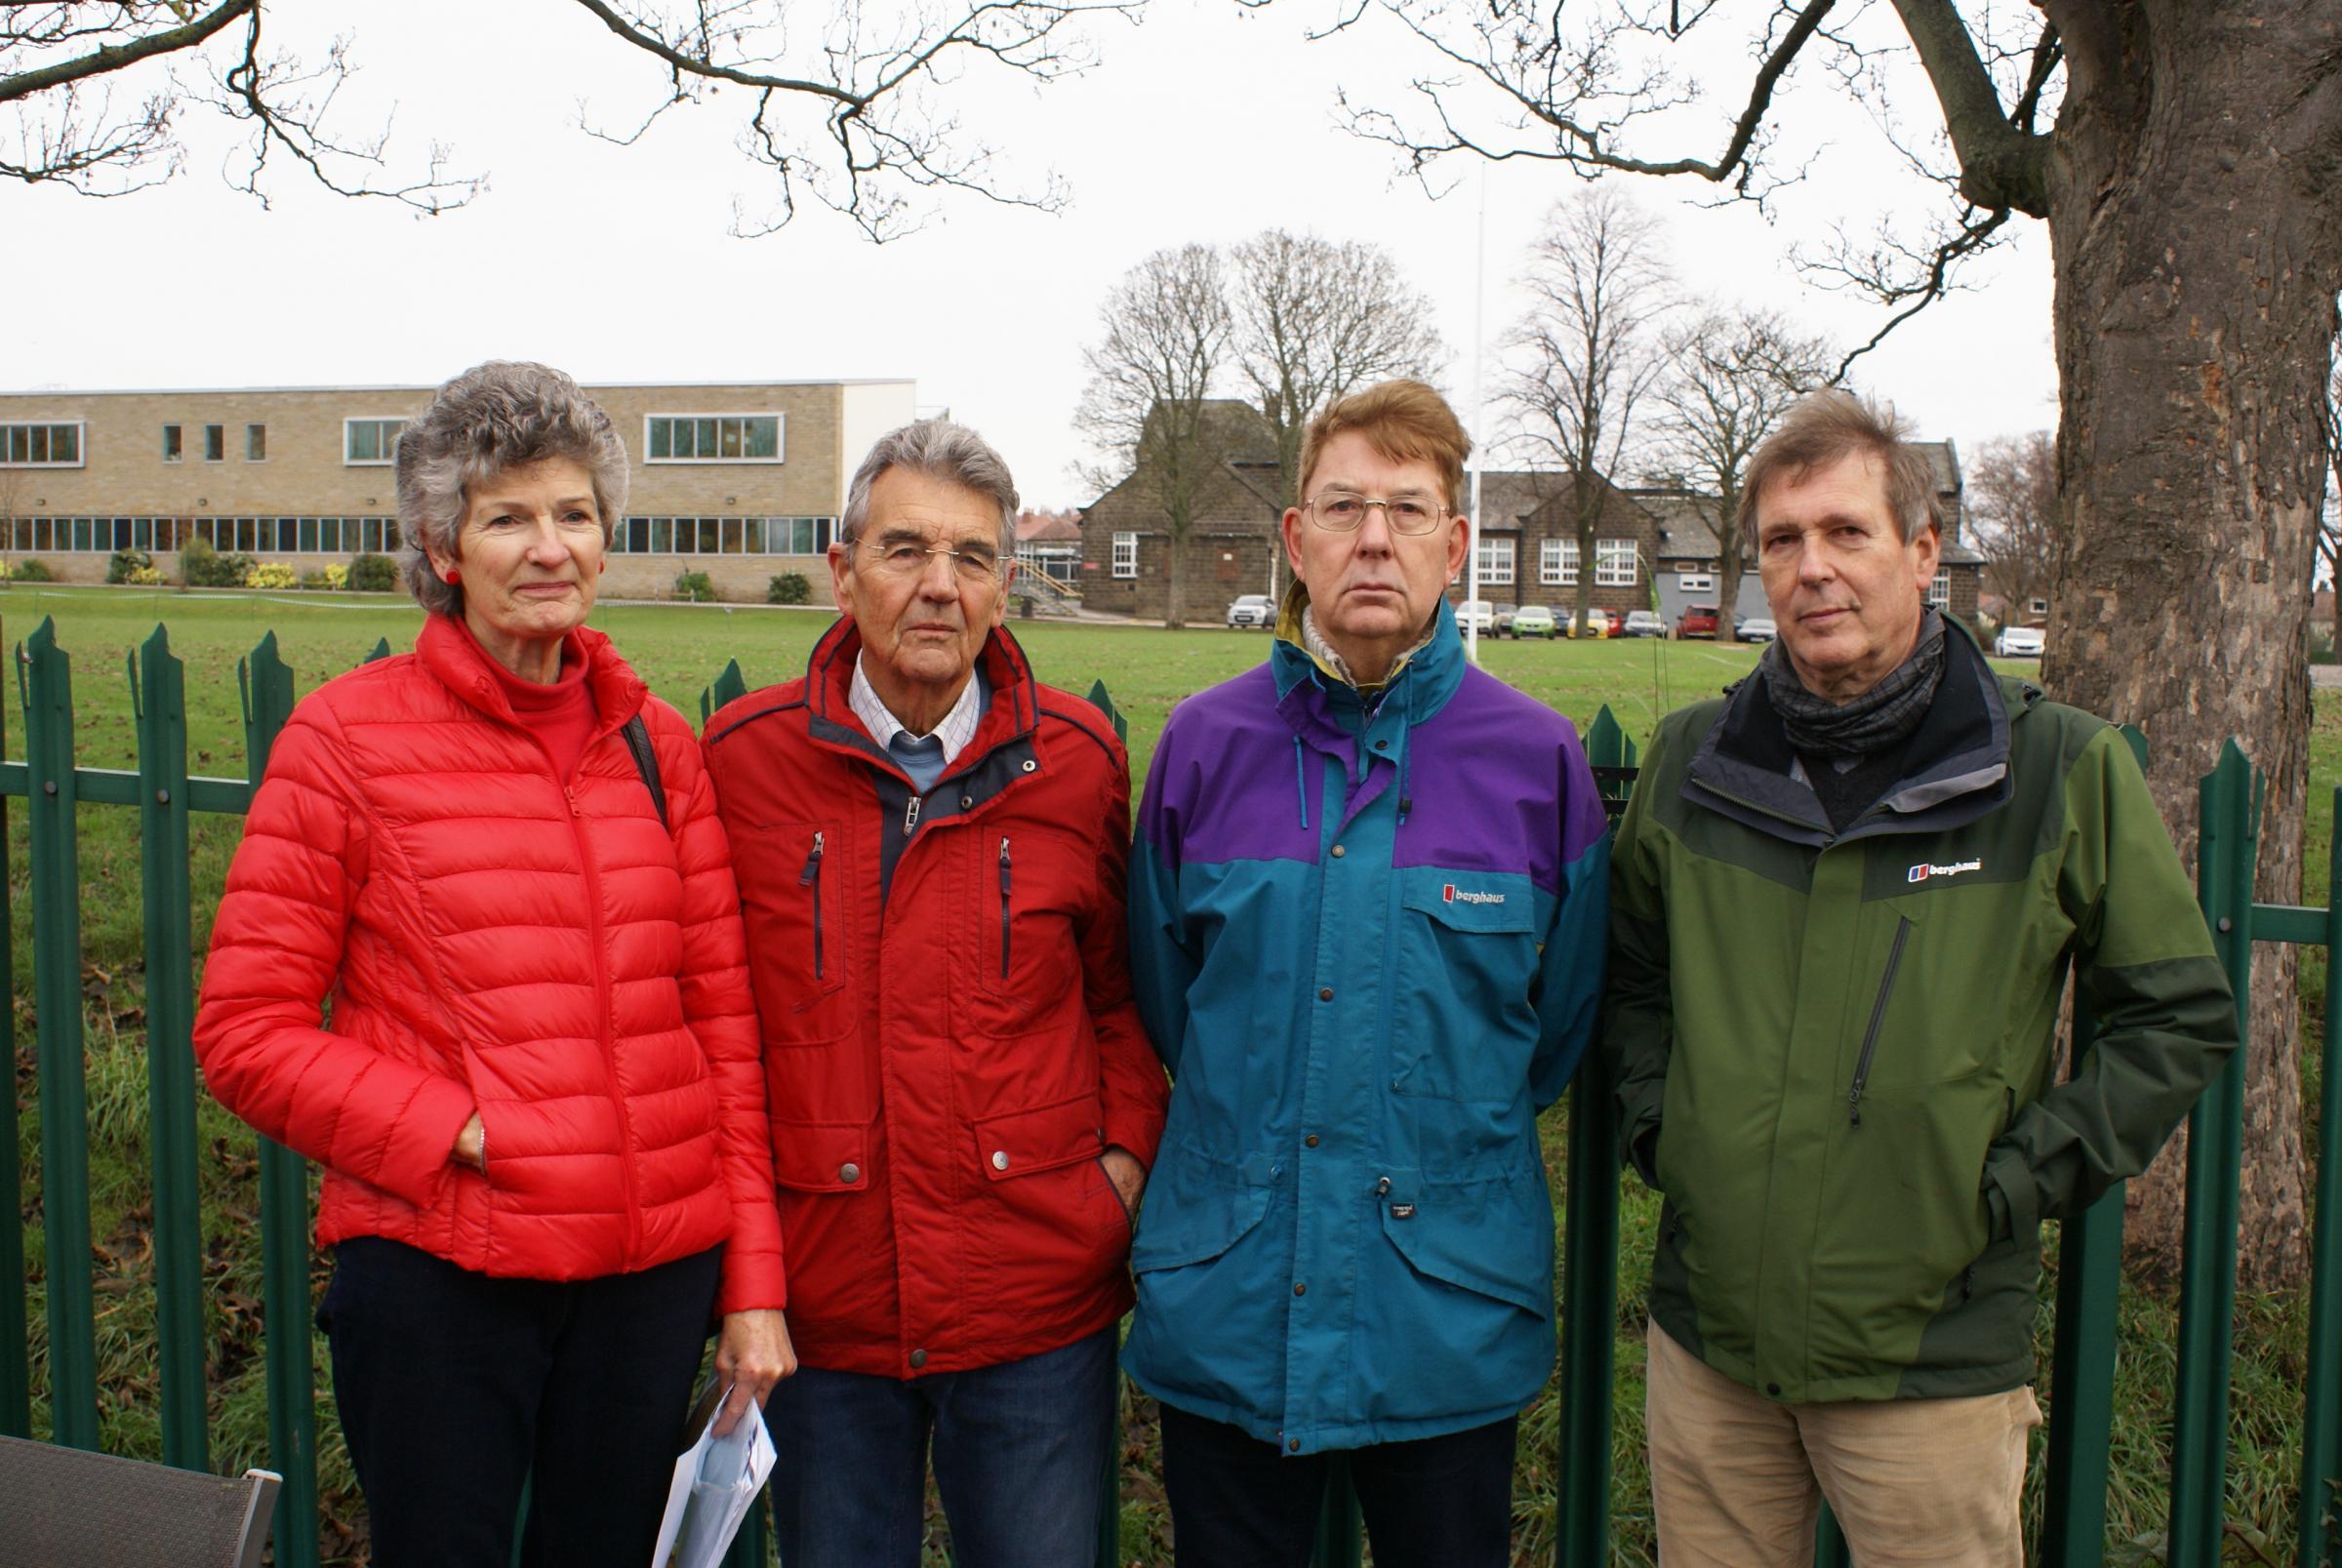 "It's in the wrong place" - residents protest at plans for 3G pitch in Otley